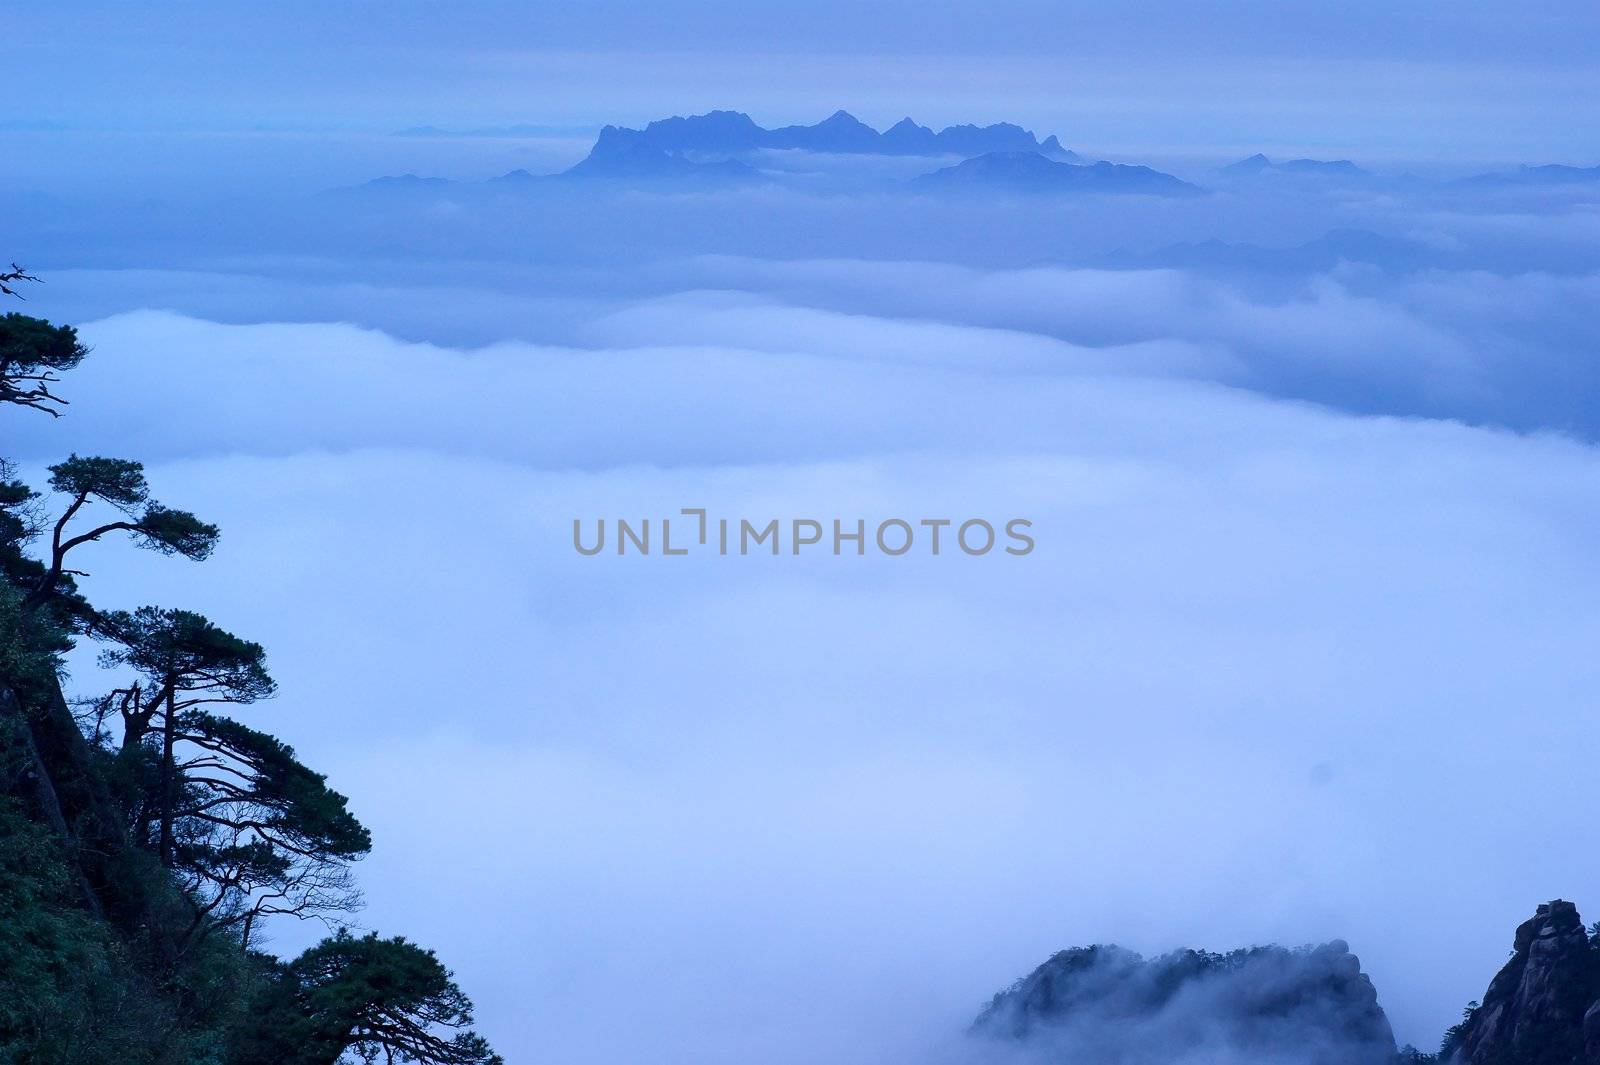 The cloud and mist of Sanqingshan mountain by xfdly5